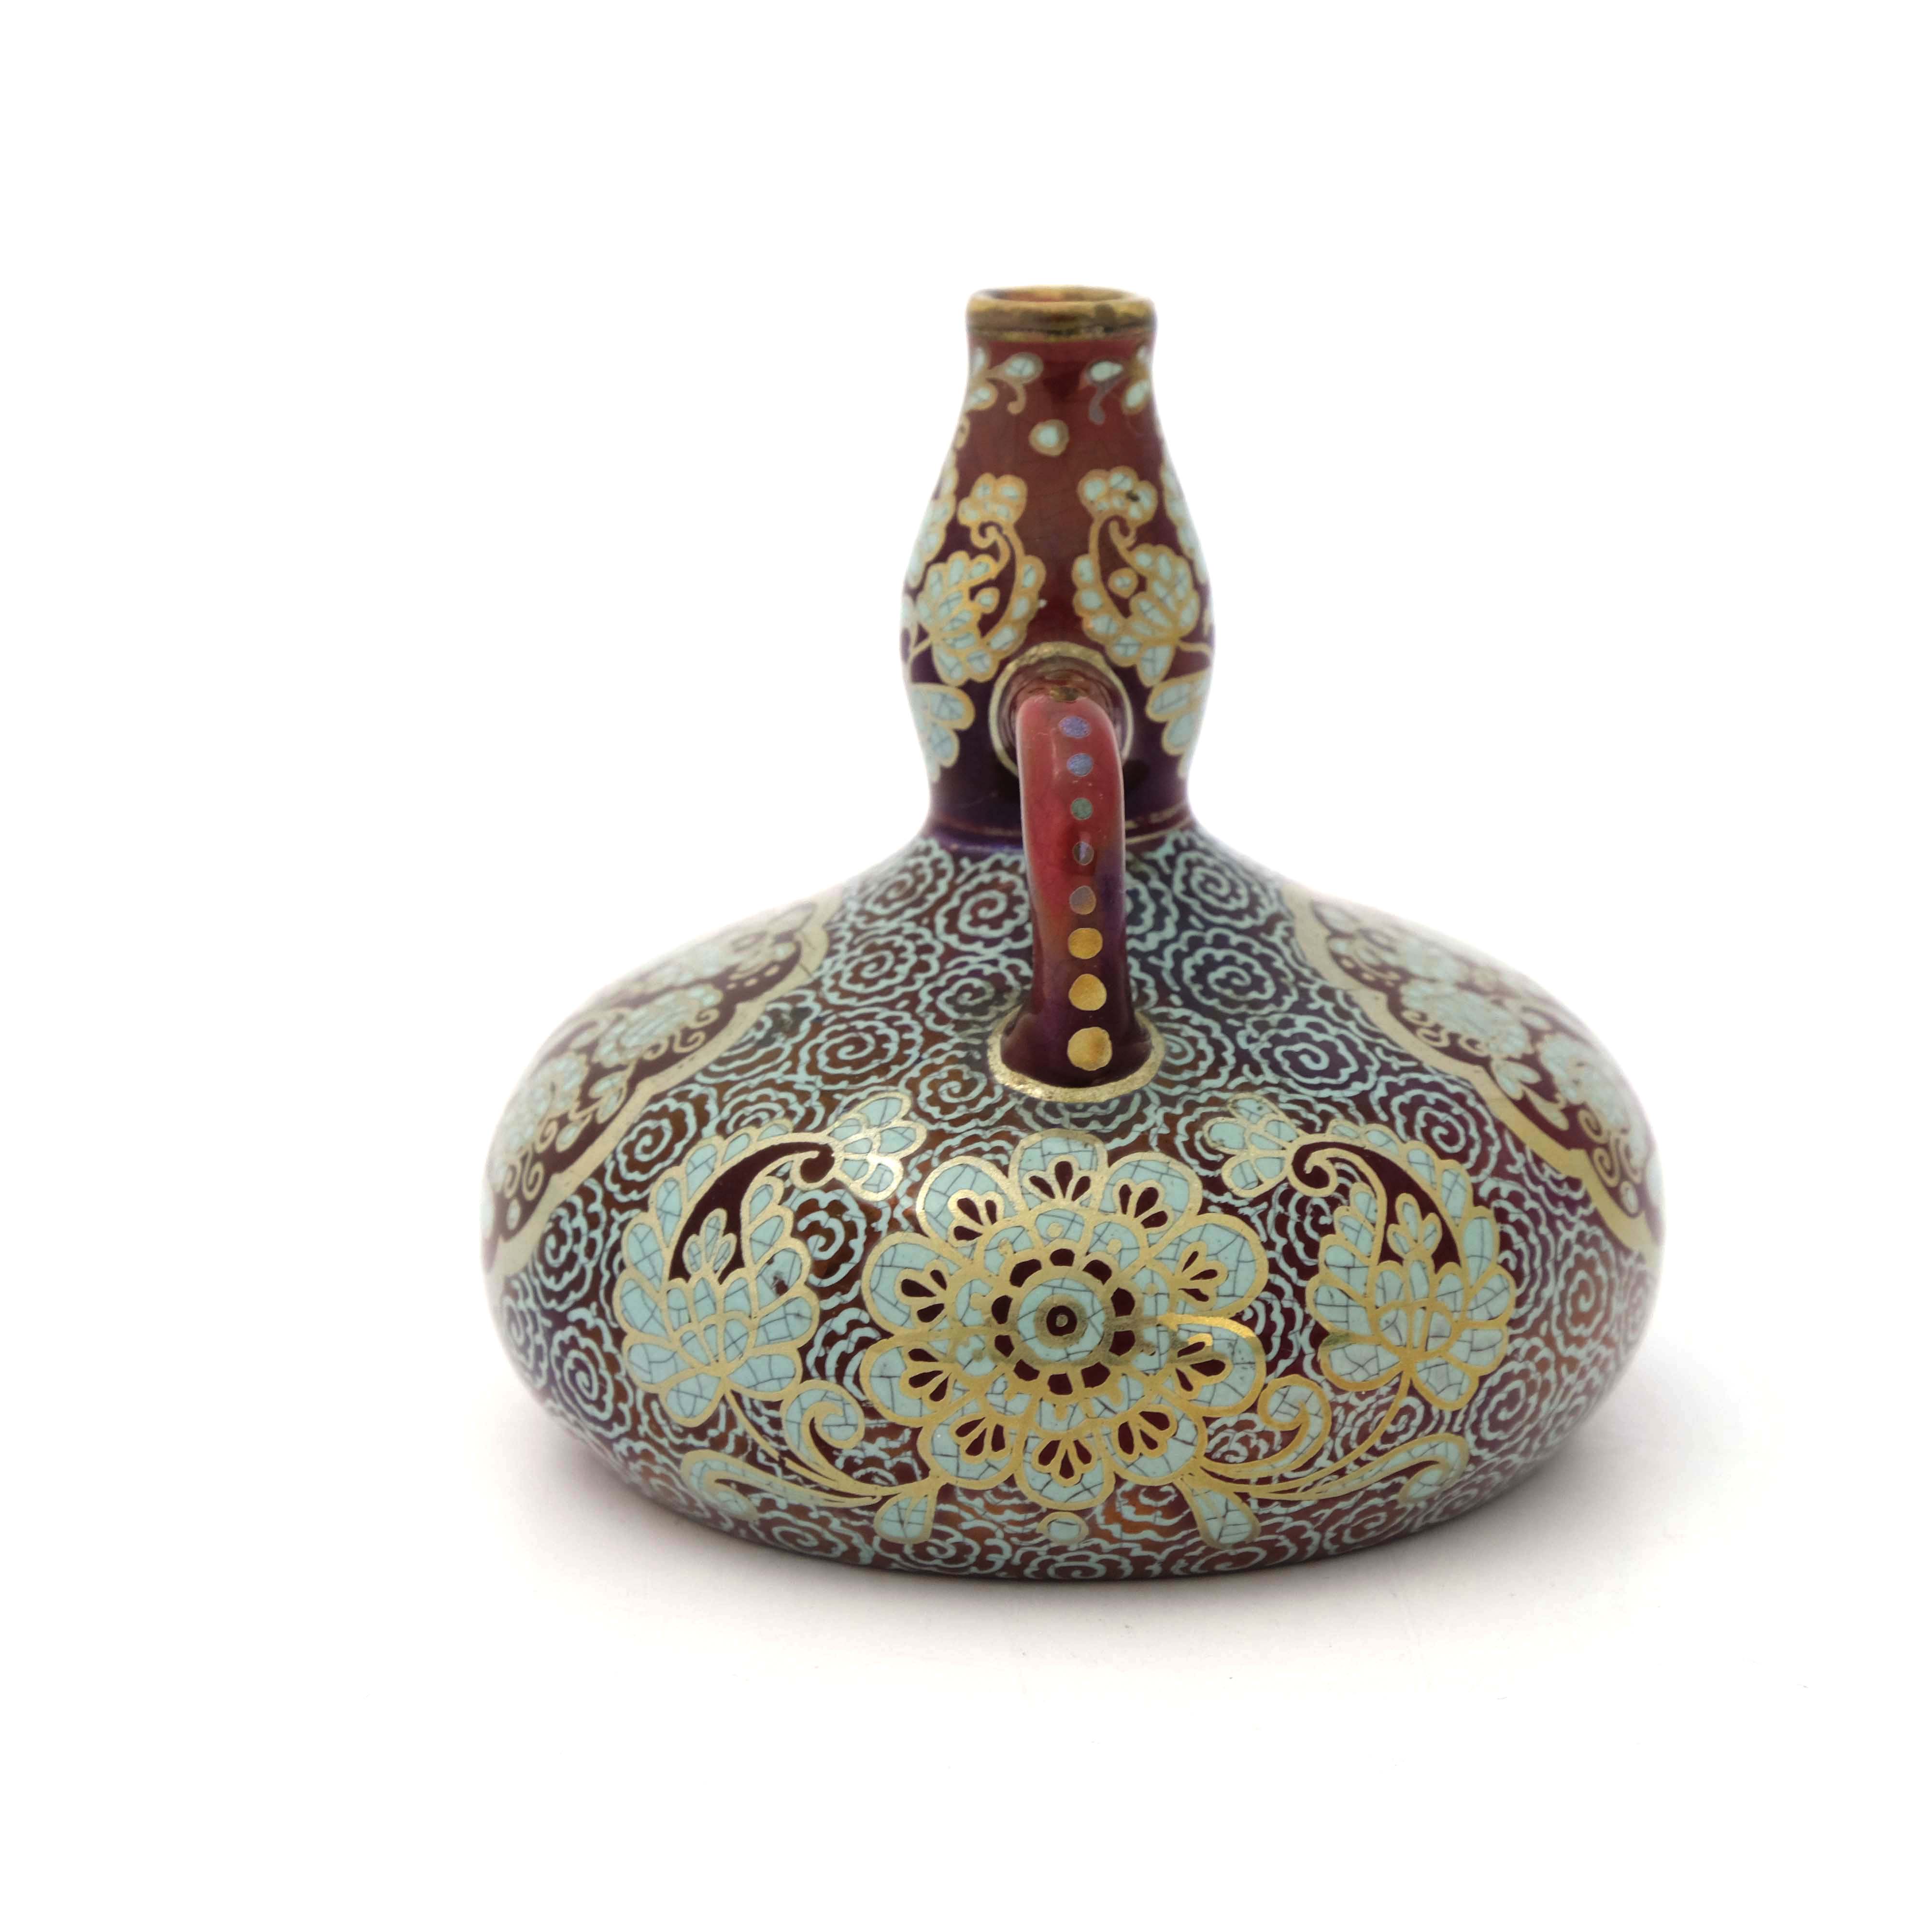 Zsolnay, Pecs, a miniature lustre vase - Image 2 of 5